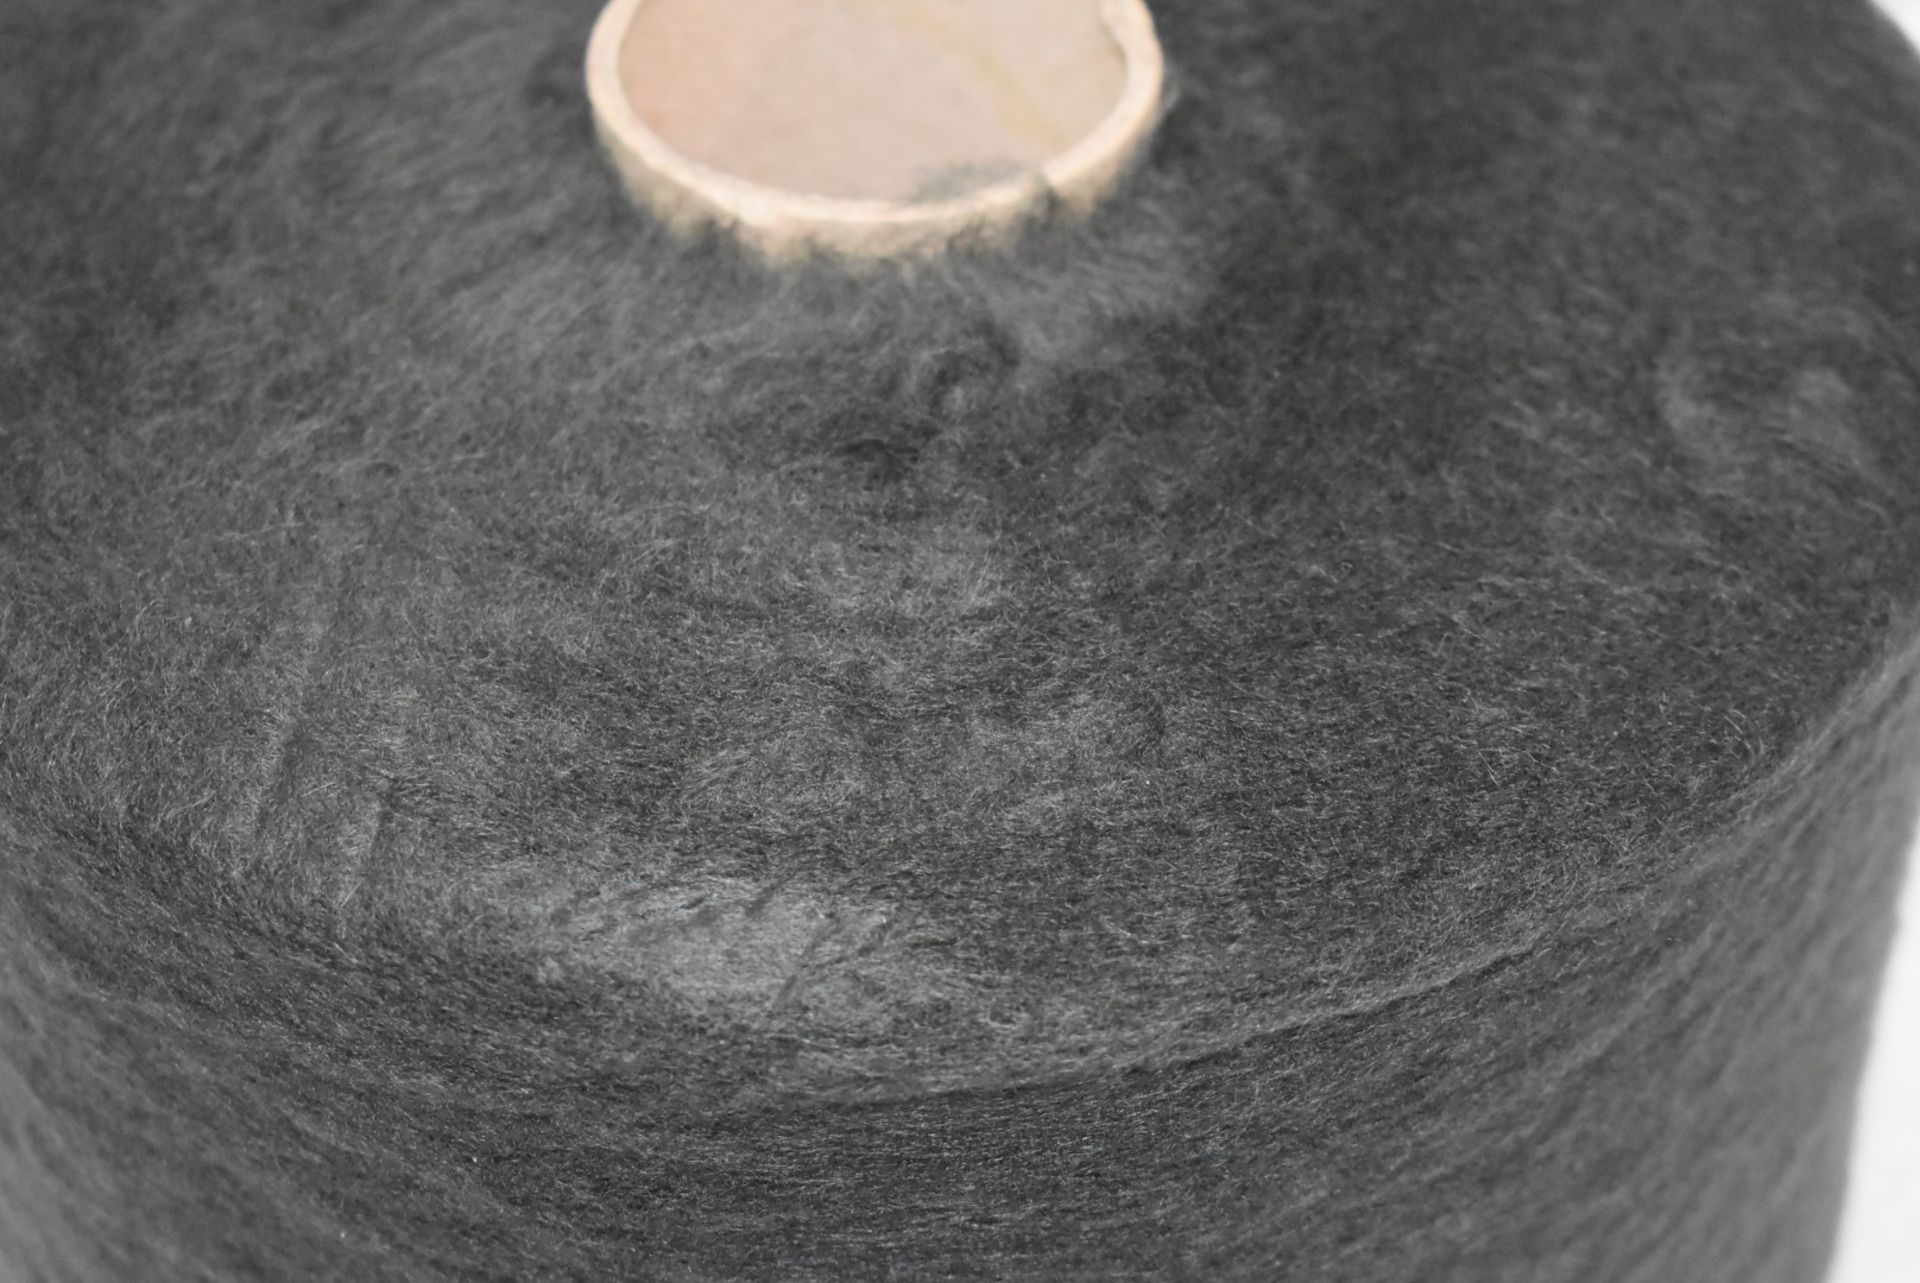 1 x Cone of 1/7,5 Lagona Knitting Yarn - Charcoal - Approx Weight: 2,300g - New Stock ABL Yarn - Image 6 of 9